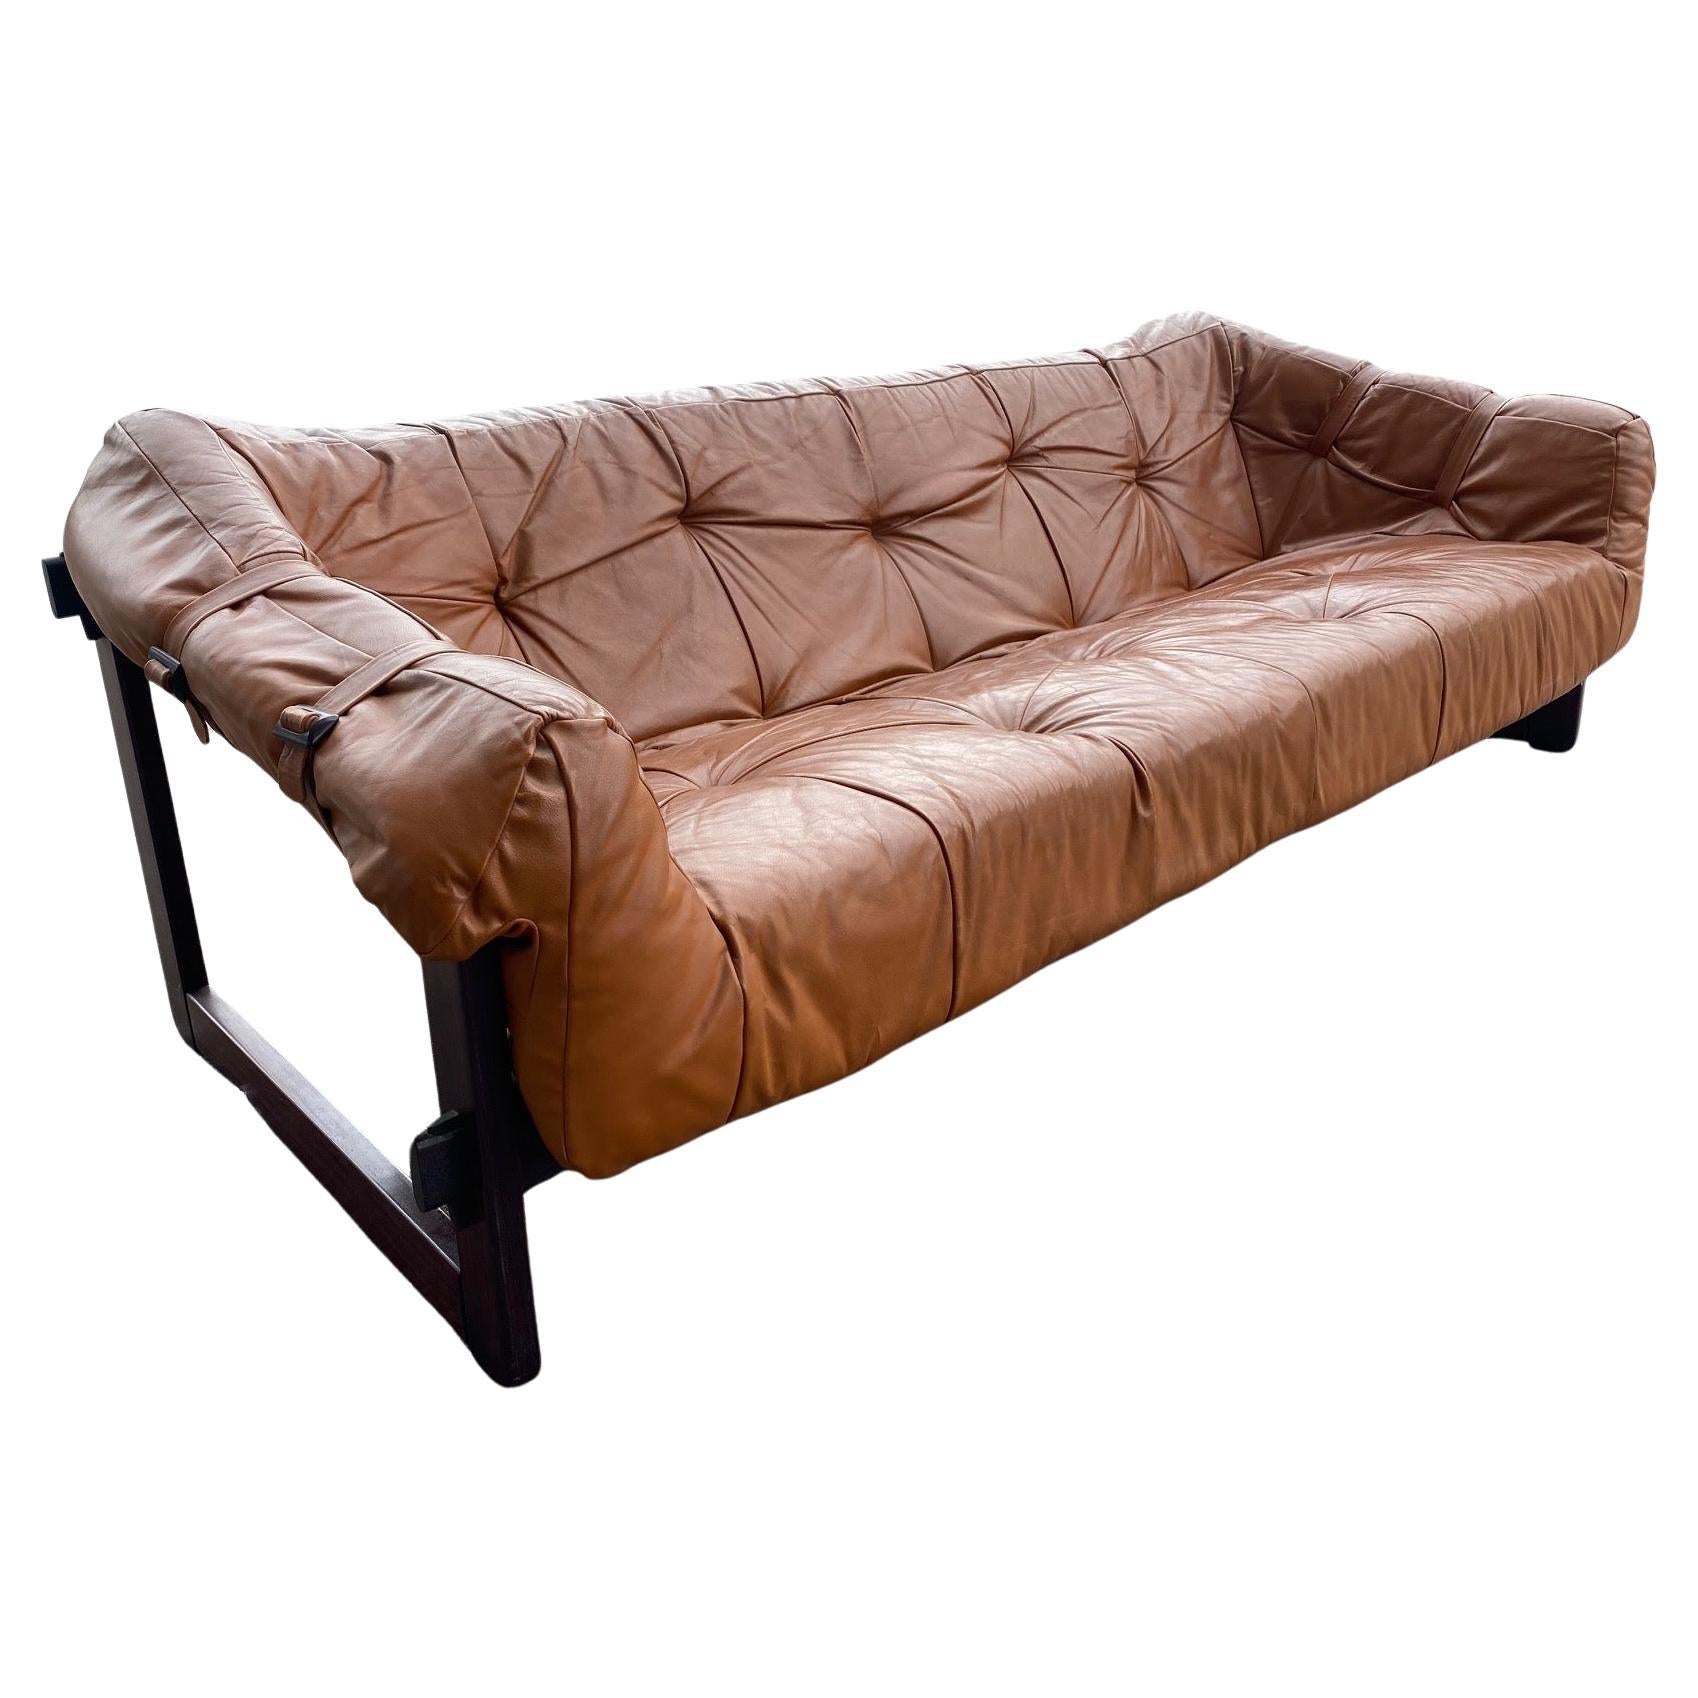 Mid-Century Modern MP-091 3-seater sofa by Percival Lafer in original Brazilian Jacaranda wood and upholstered in original cognac leather. Brazil, 1960s

One of the most original and sculptural works by the Brazilian designer Percival Lafer, who